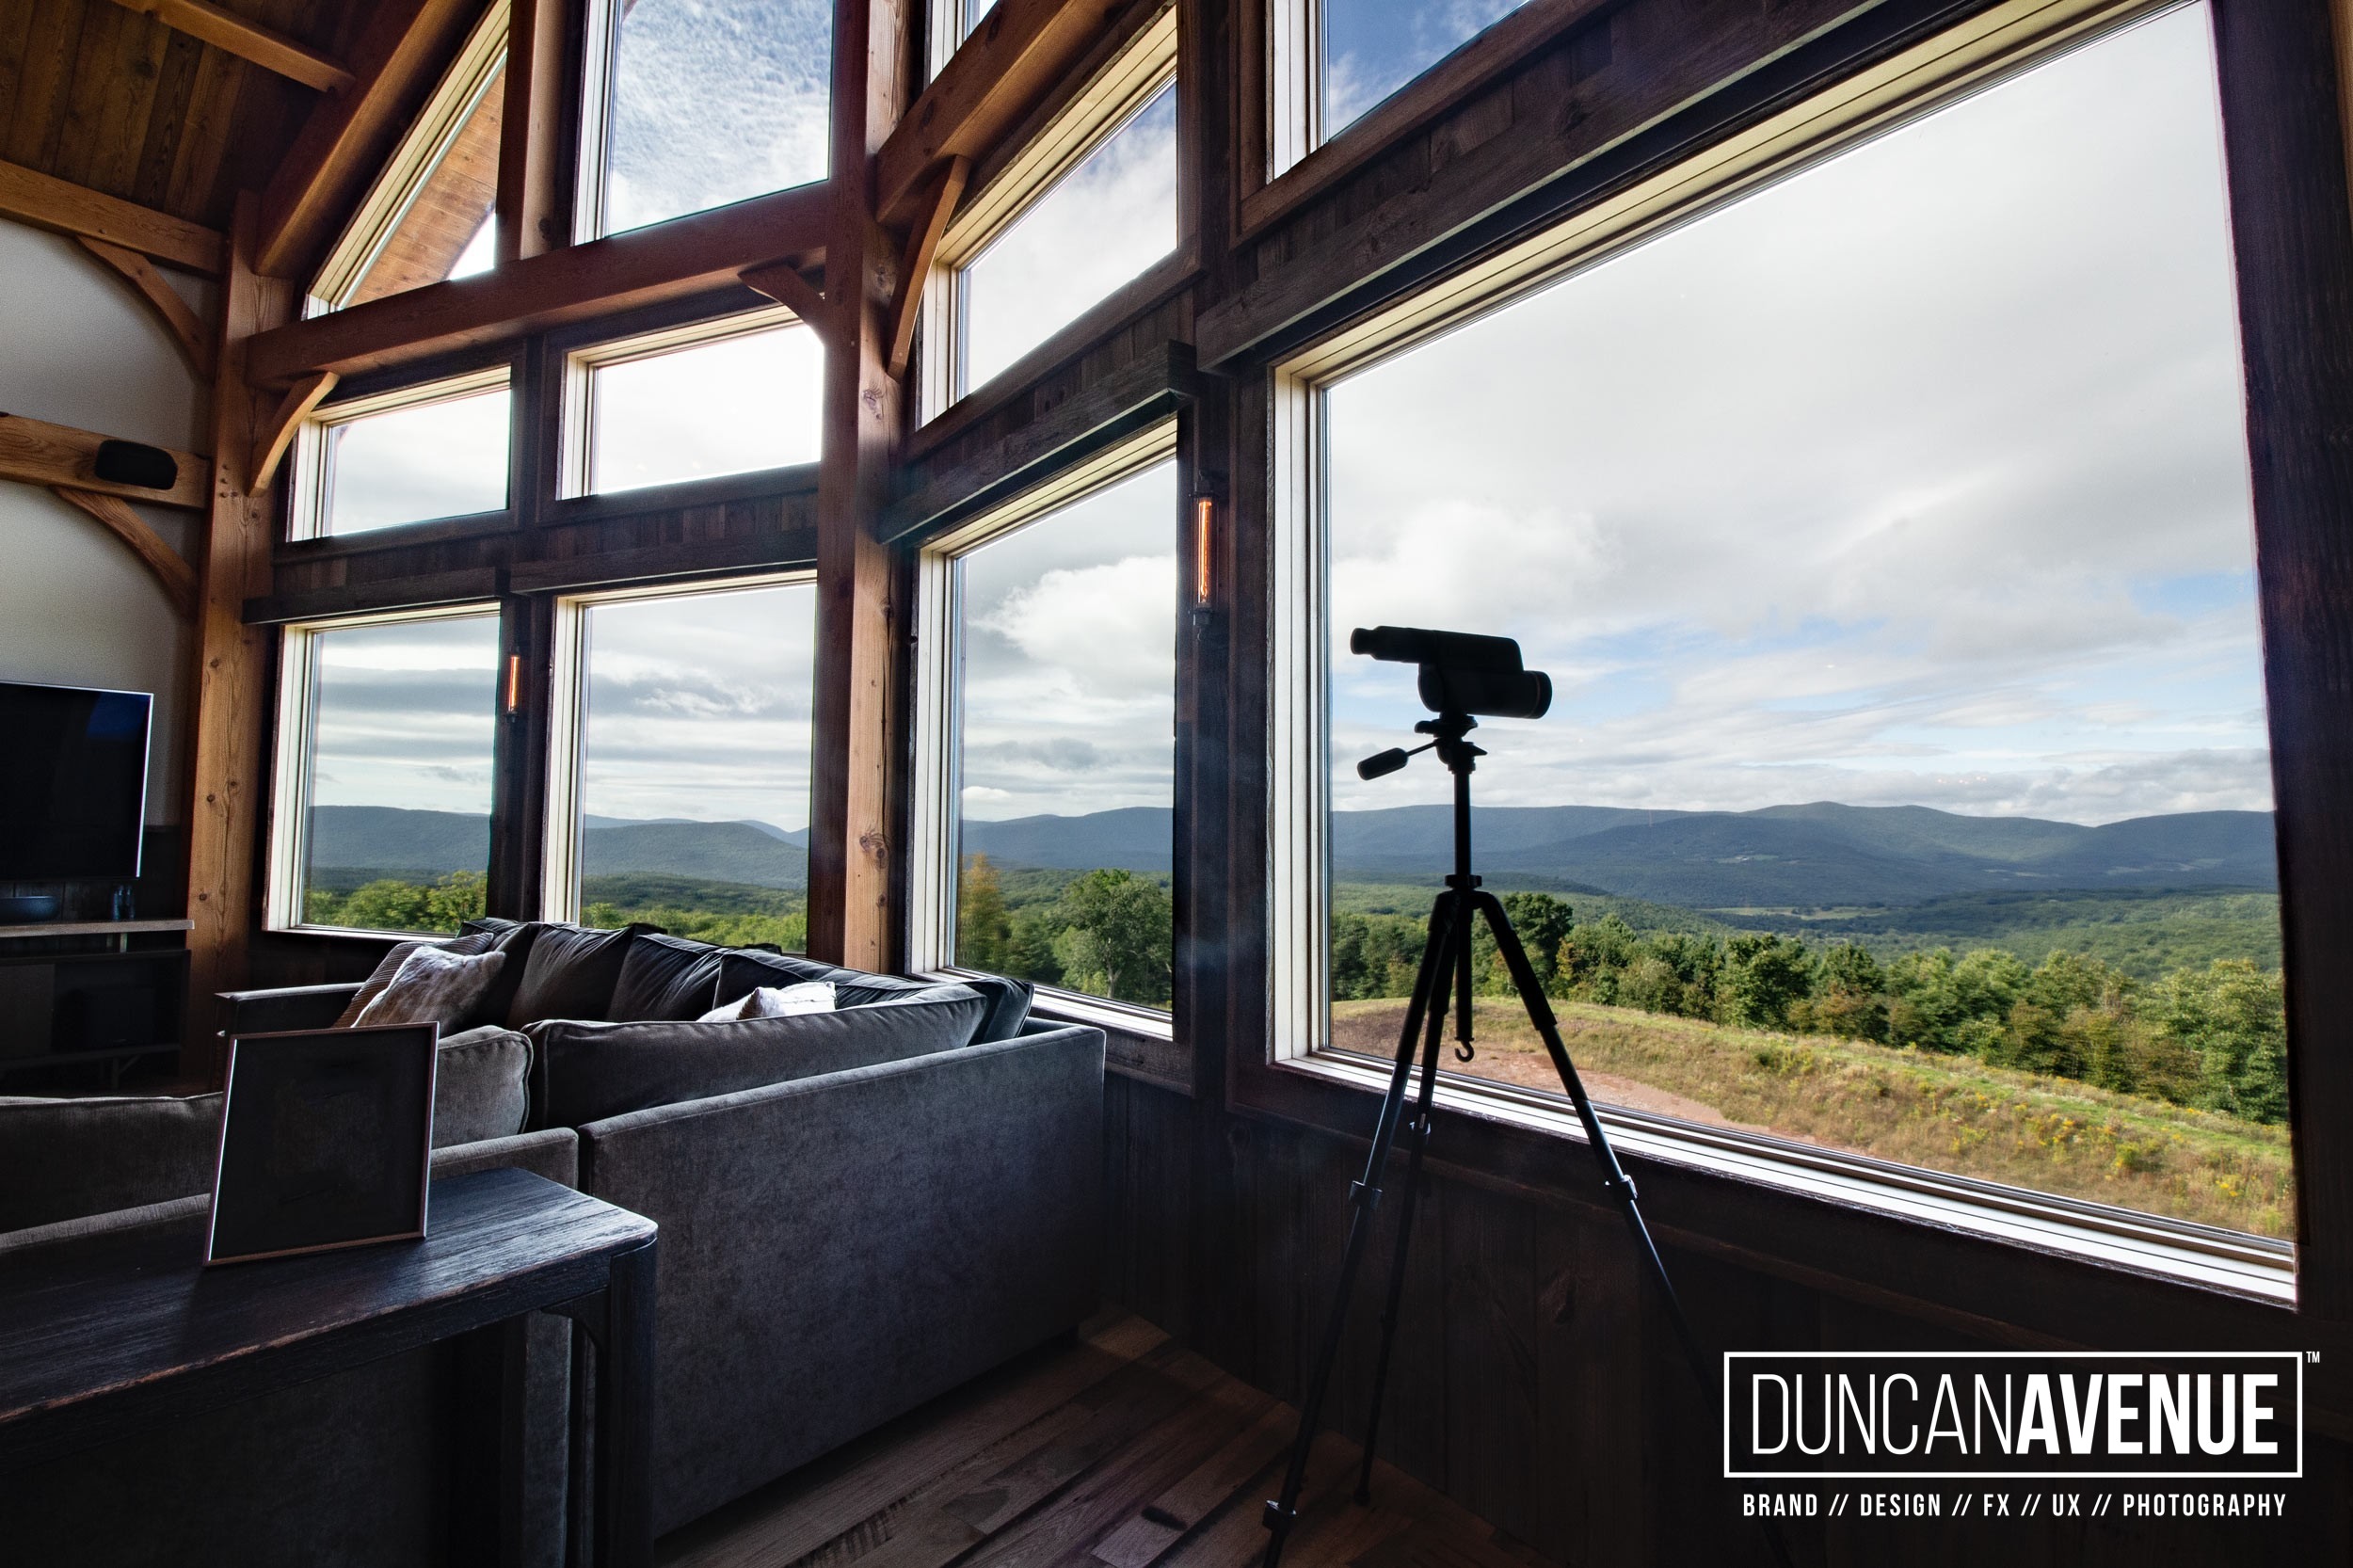 8 Great DIY Tips for Shooting Your Own Real Estate Photos by Maxwell Alexander (Duncan Avenue Real Estate Photography Studio)